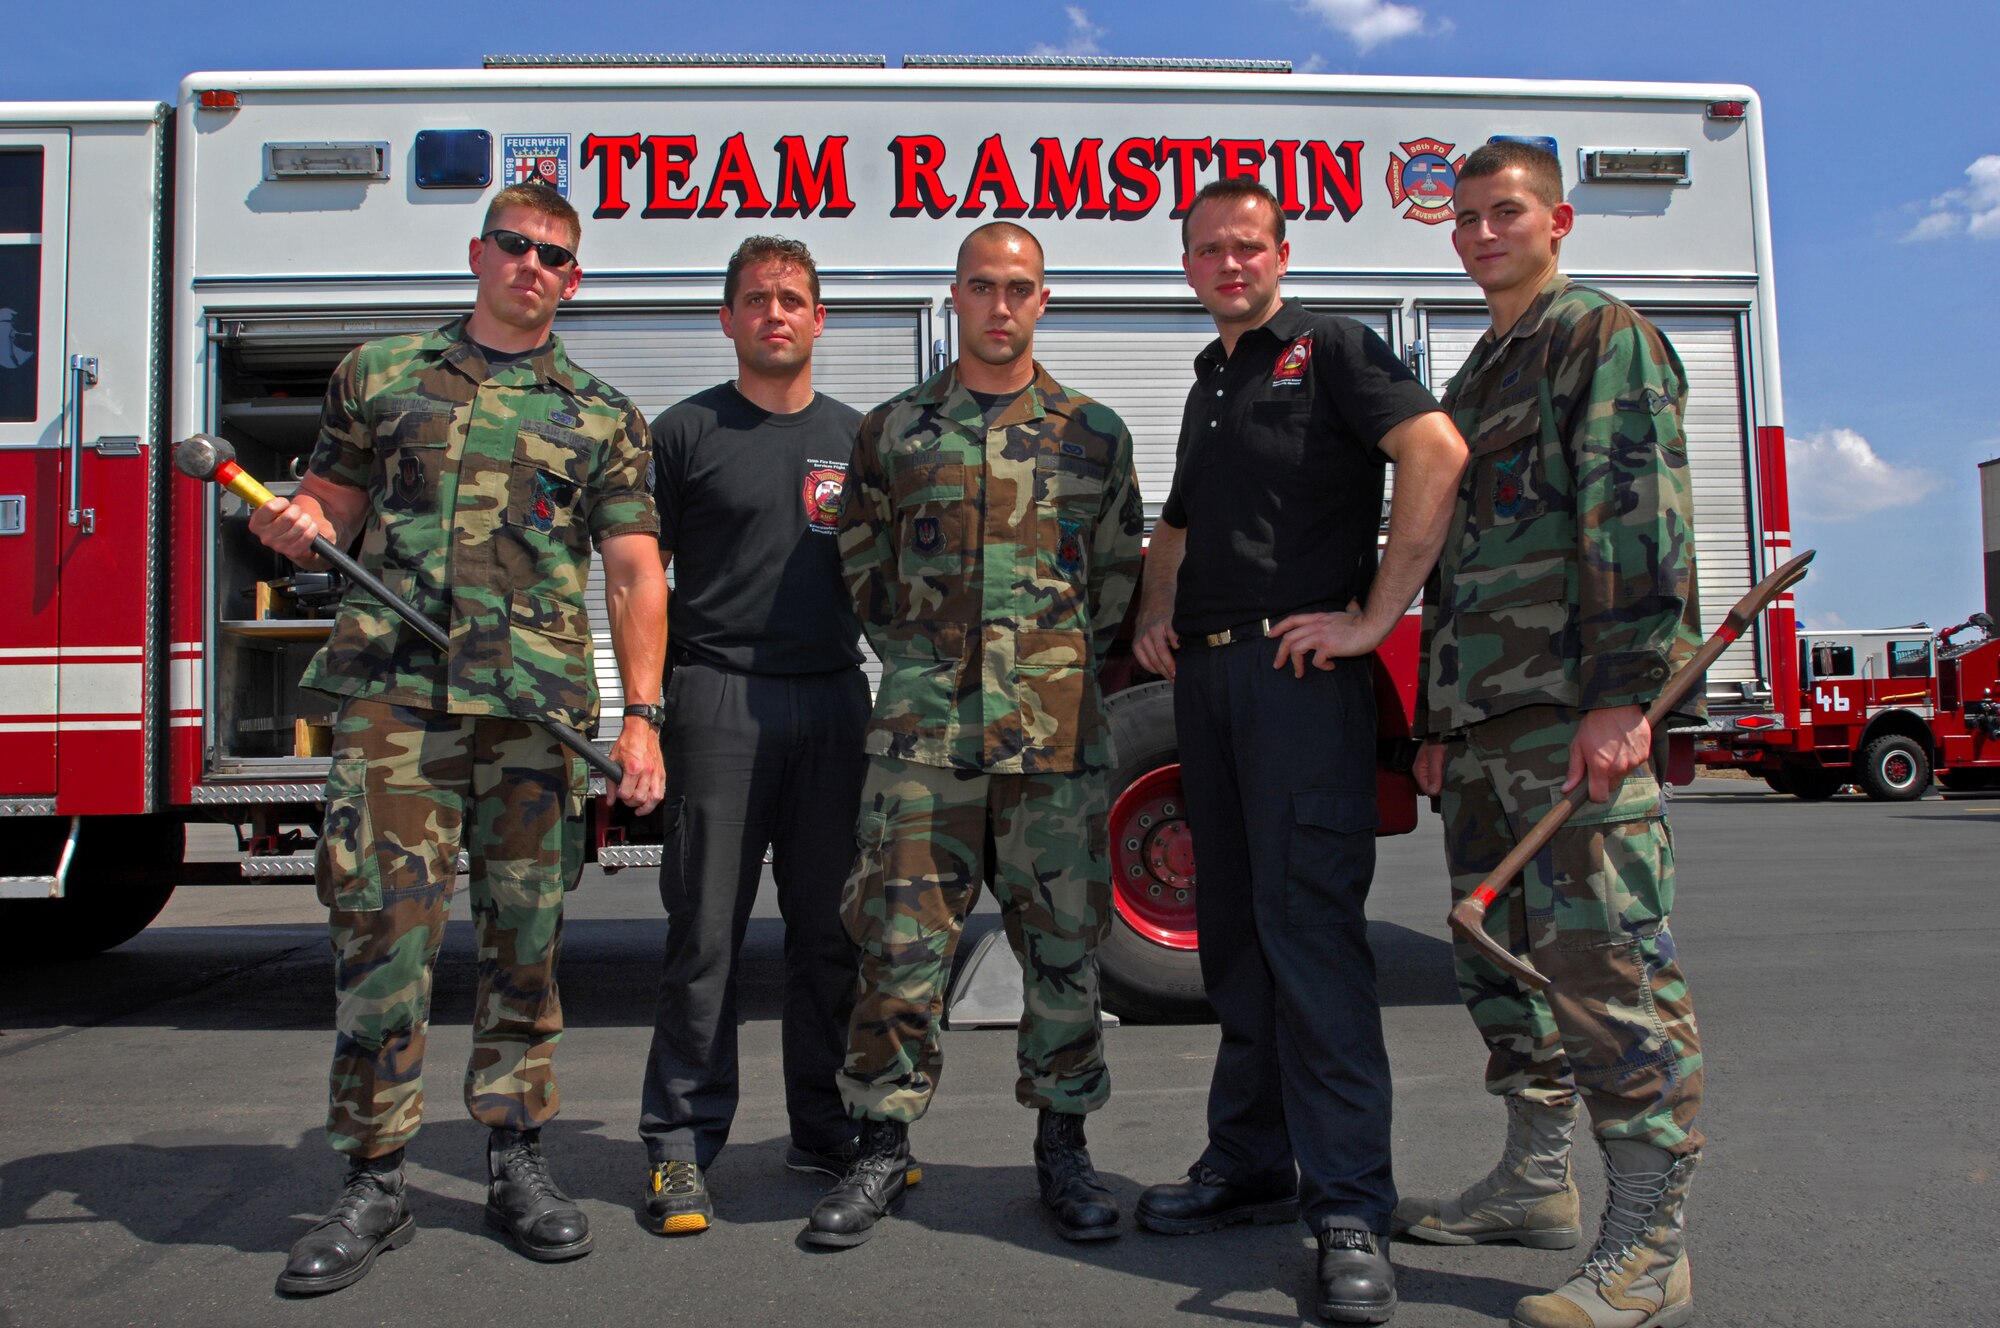 The 435th Civil Engineering Squadron Fire Department is made up of both U.S. Military and Local National personnel. Together they work hand in hand to meet the demands of their mission under the 435th and United States Air Forces in Europe. pictured in this photo is (from left) Staff Sgt. Brian Hyland, Mr. Stefan Domis, Senior Airman Antony Dalo, Mr. Diehl Wolfgang, and Airman David Thal (U.S. Air Force photo/Airman 1st Class Kenny Holston)(RELEASED)